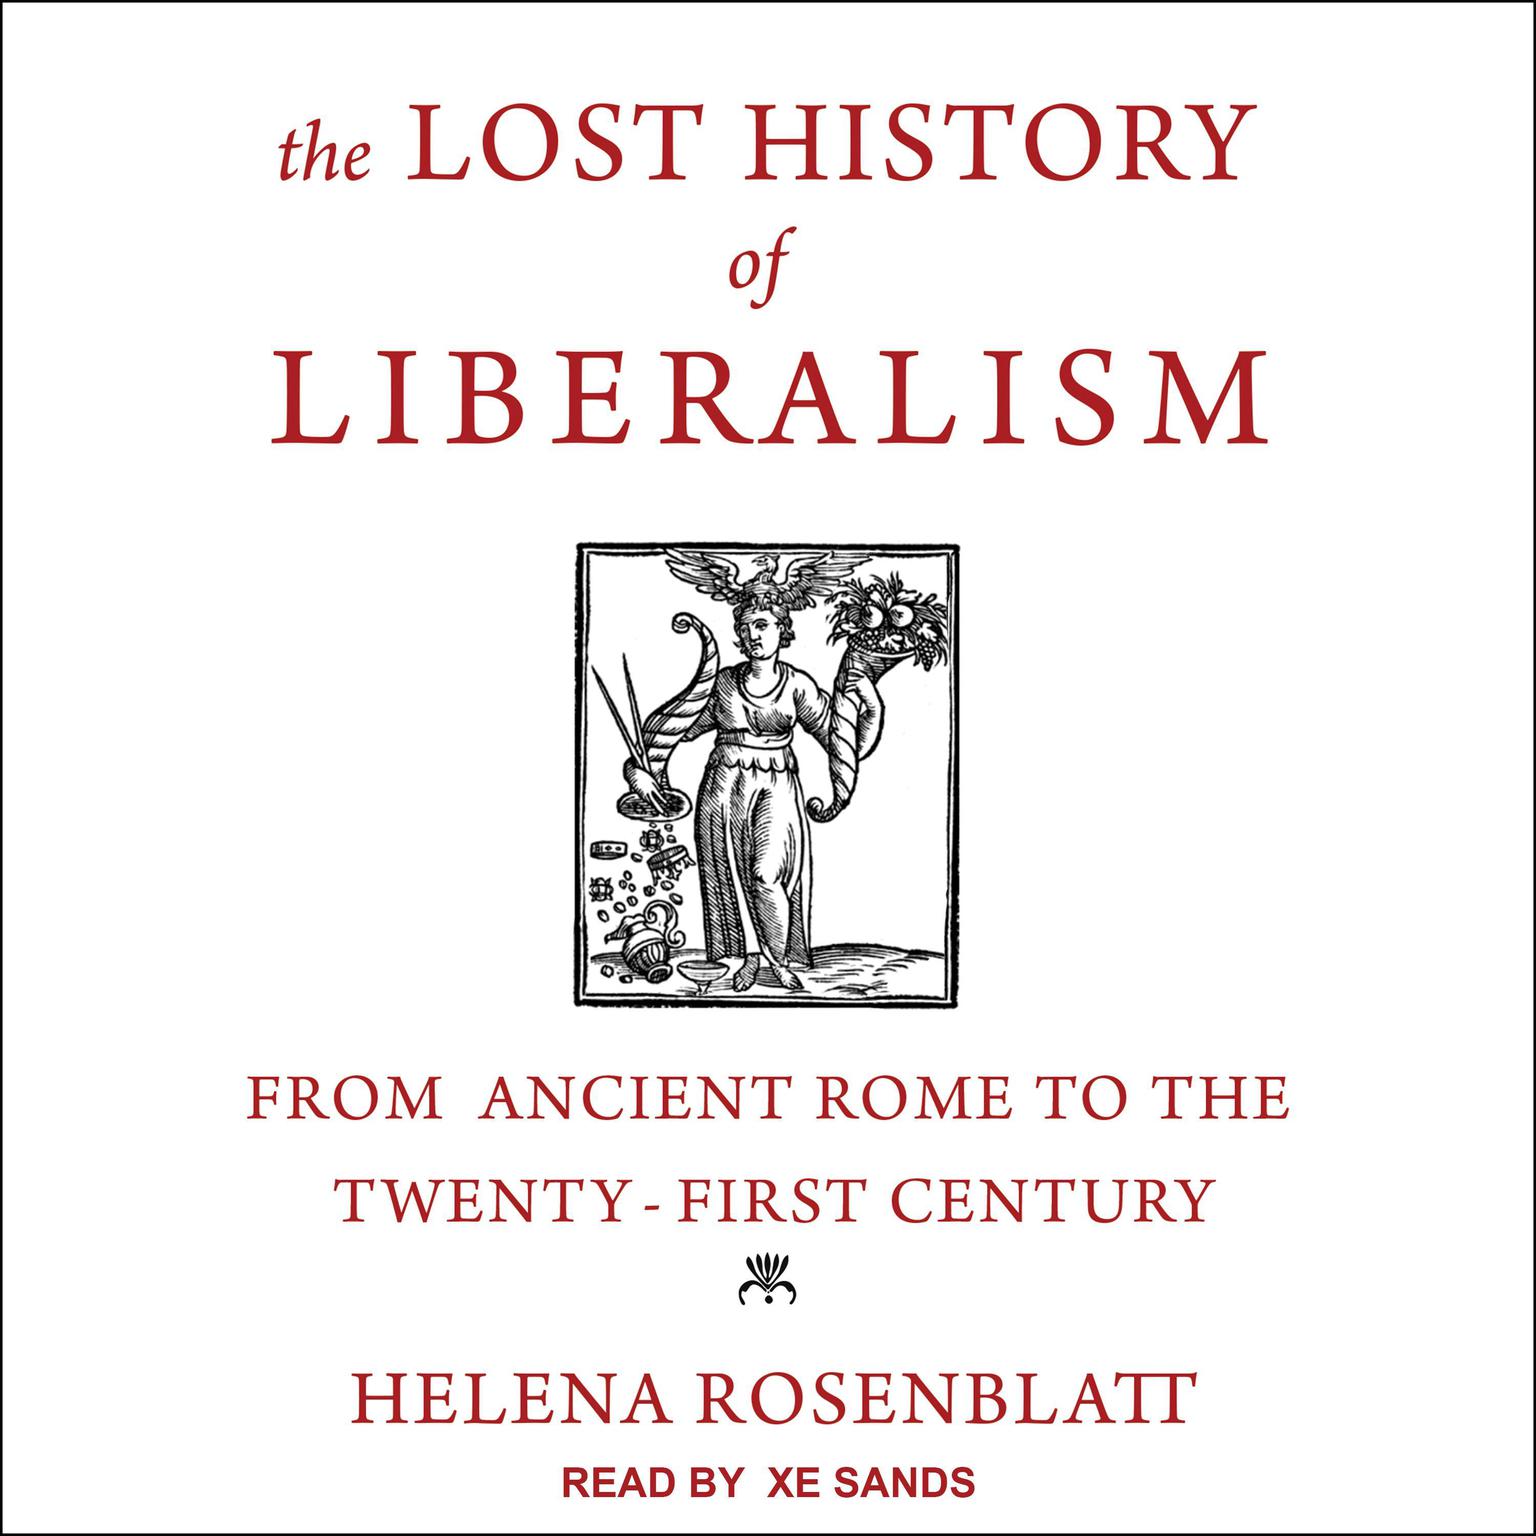 The Lost History of Liberalism: From Ancient Rome to the Twenty-First Century Audiobook, by Helena Rosenblatt